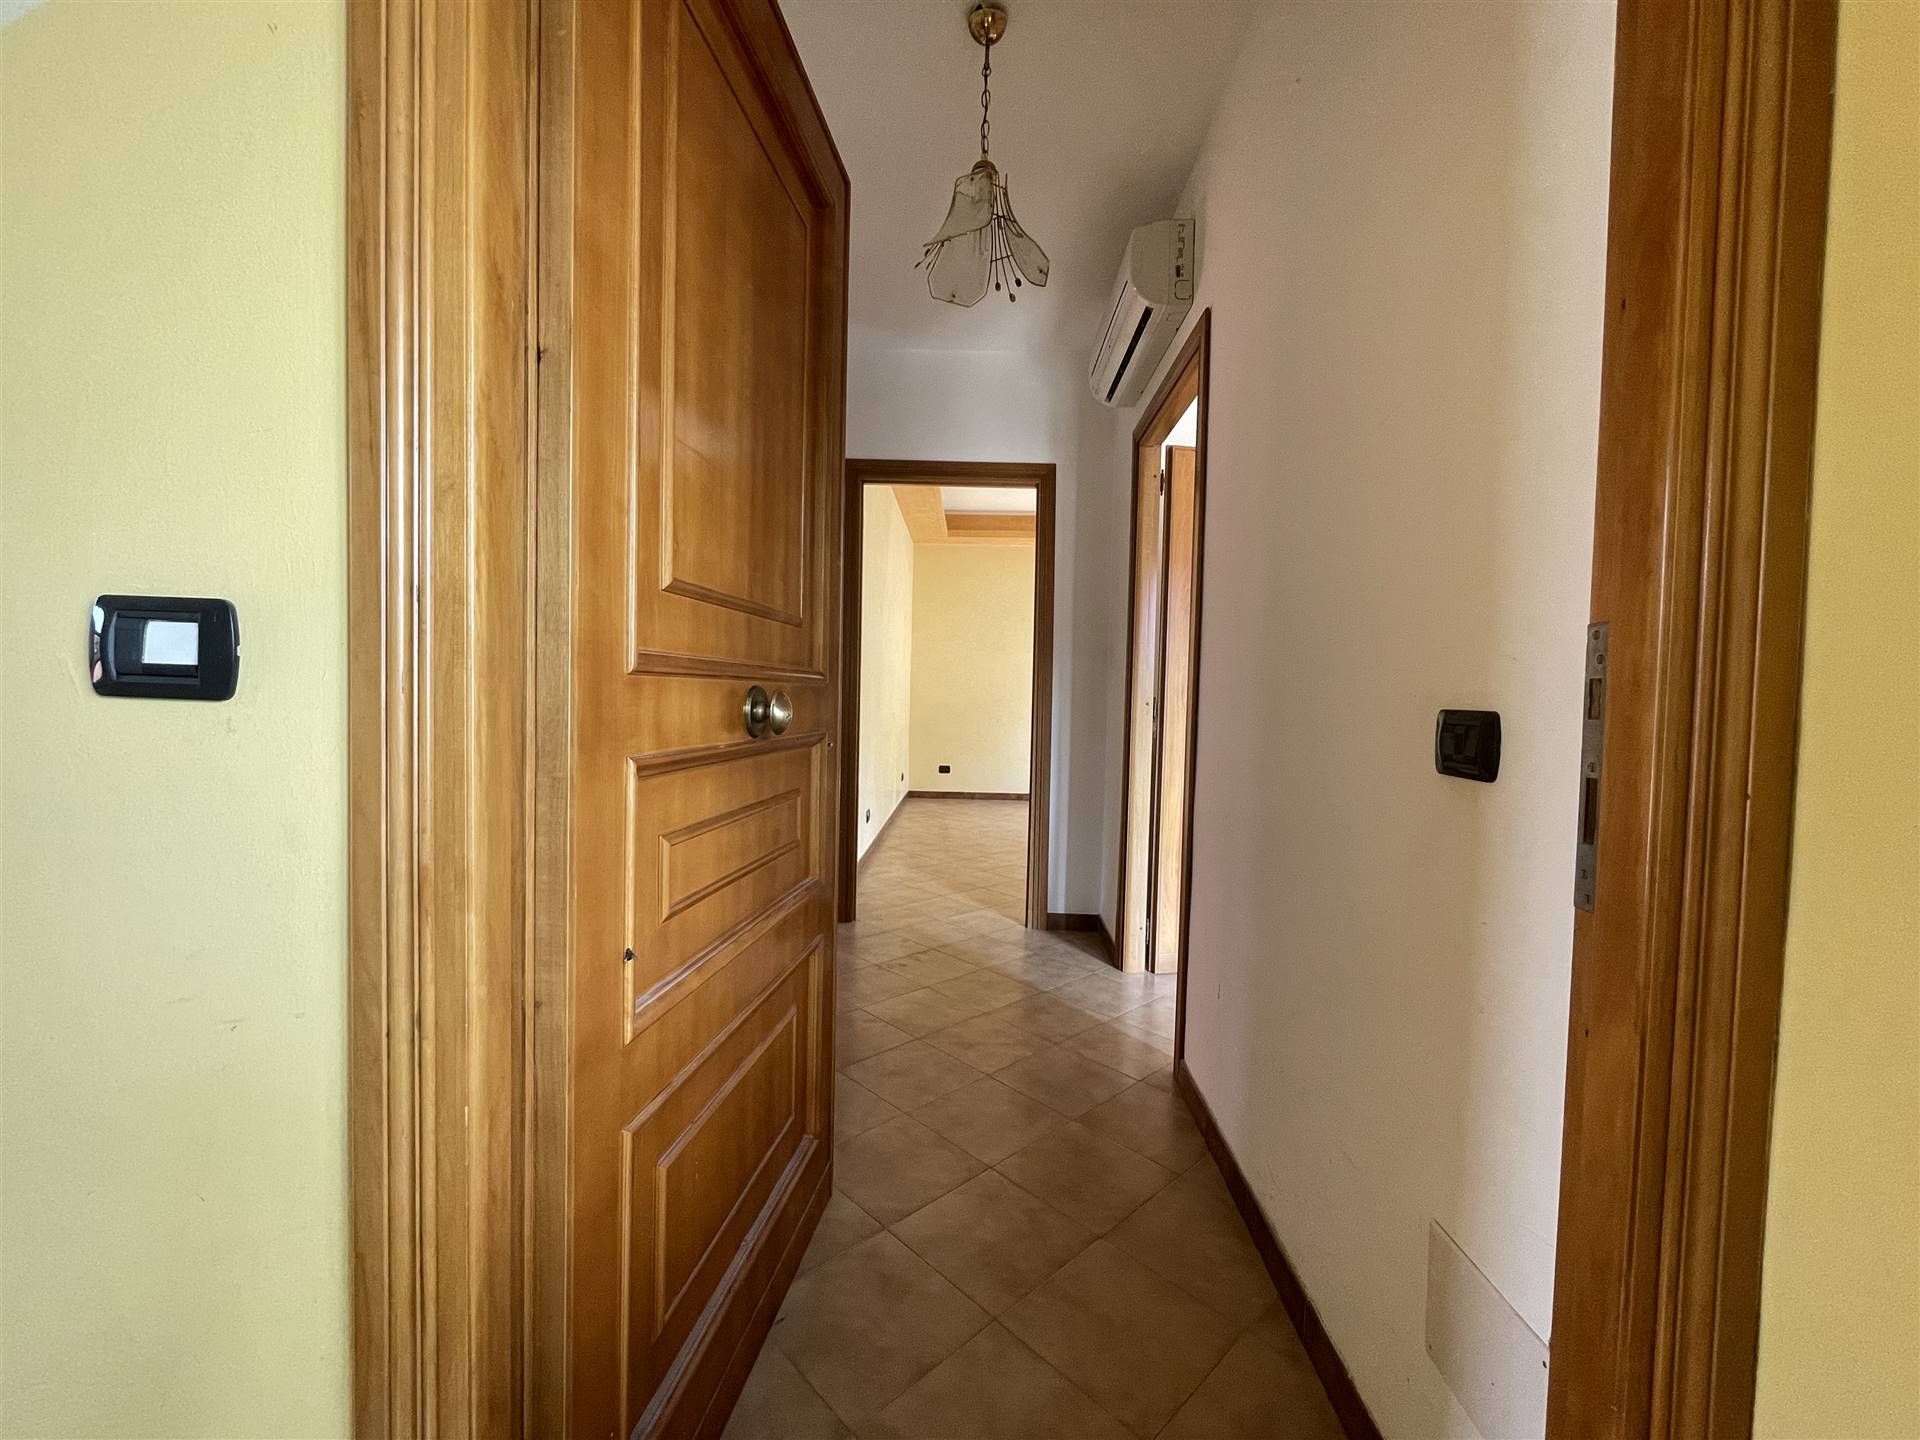 SERMONETA SCALO, SERMONETA, Detached apartment for sale of 72 Sq. mt., Be restored, Heating Individual heating system, Energetic class: E, placed at 